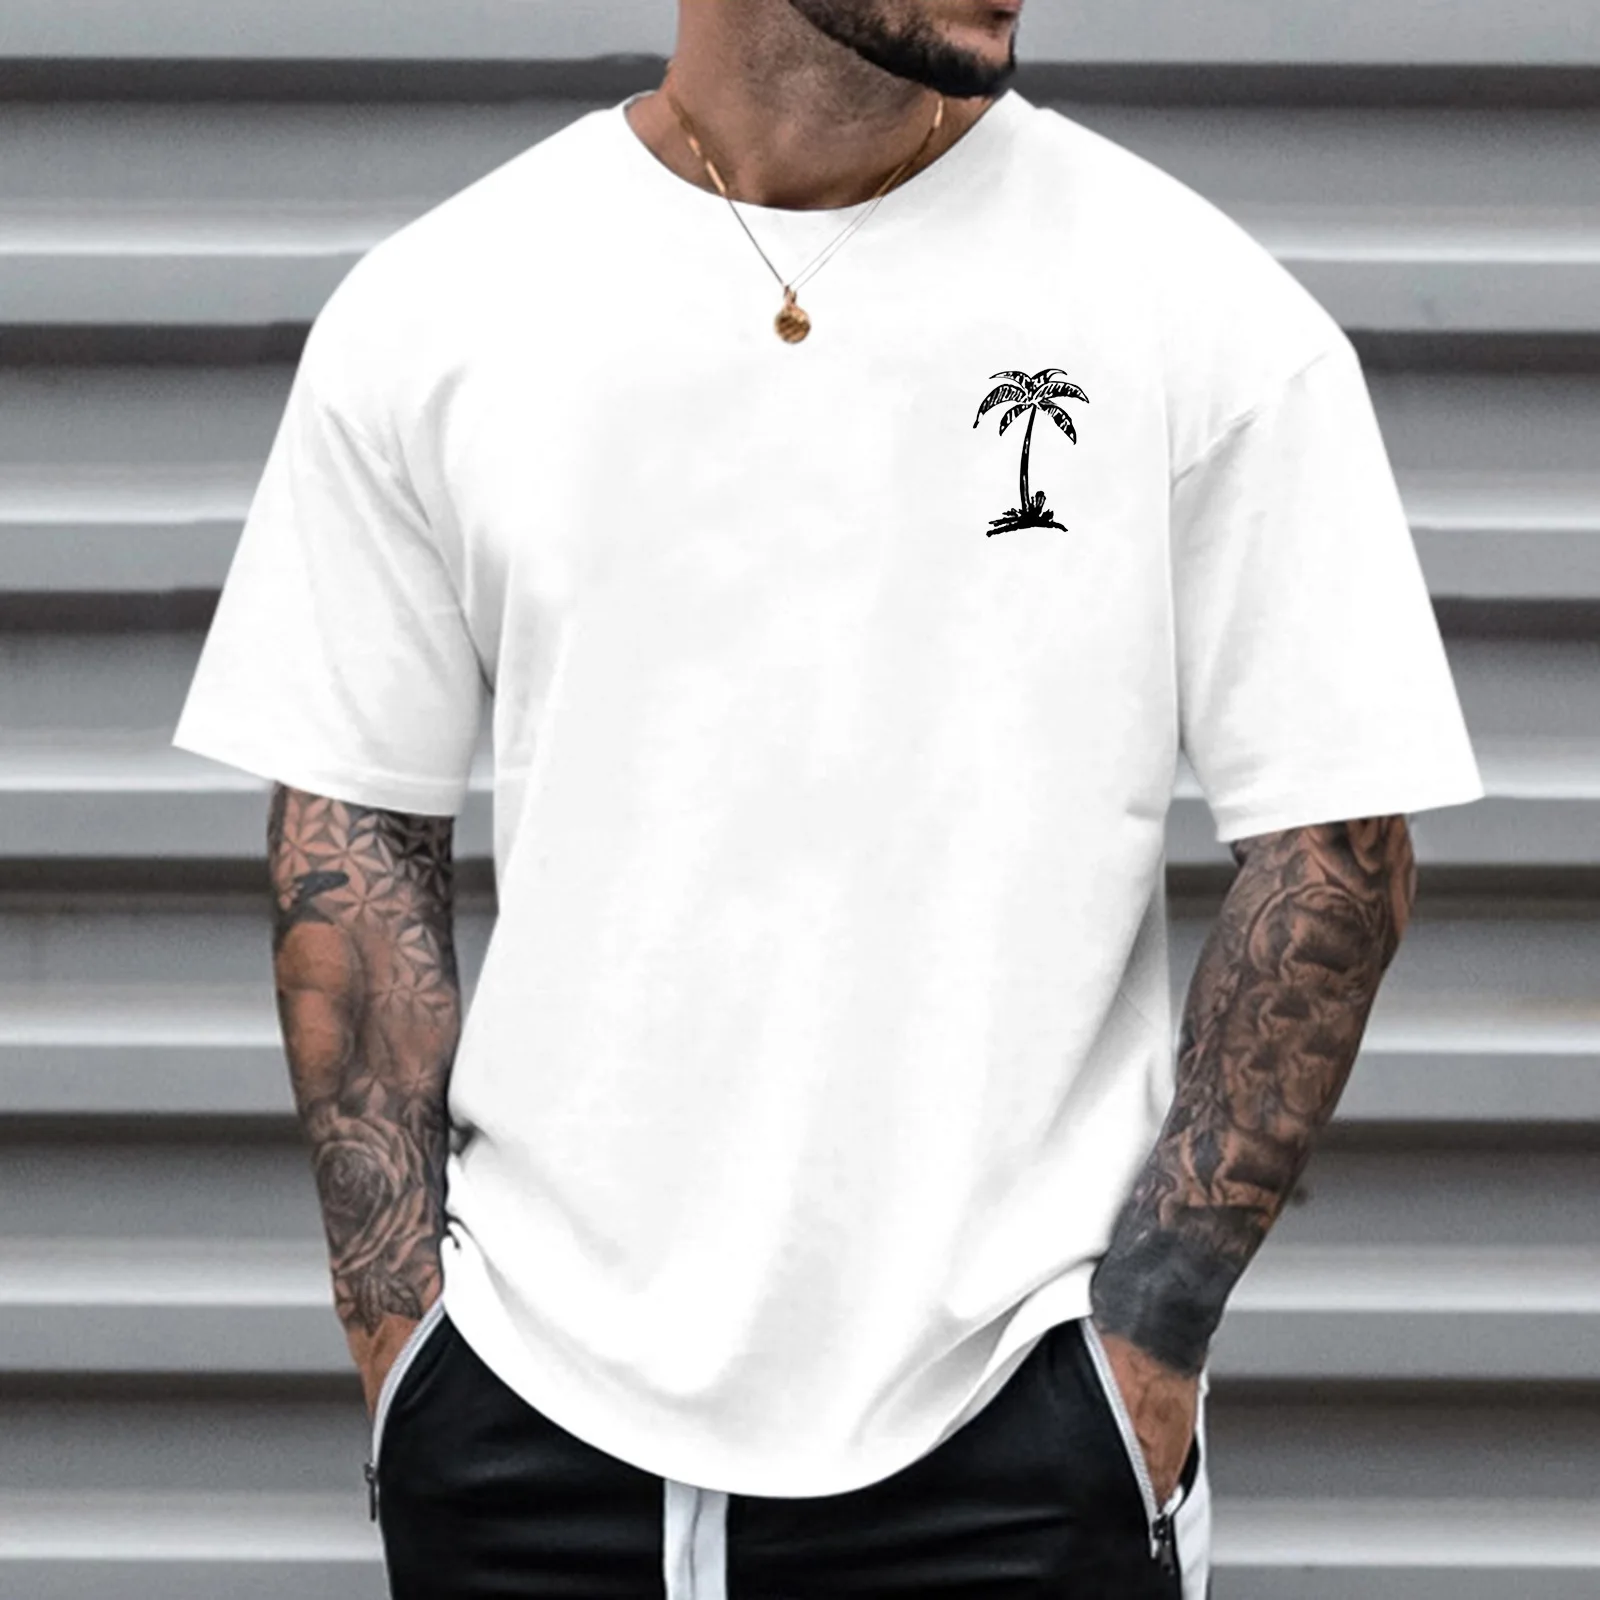 Men's outdoor casual top coconut tree pattern 3D digital printed fitness sports short sleeve T-shirt